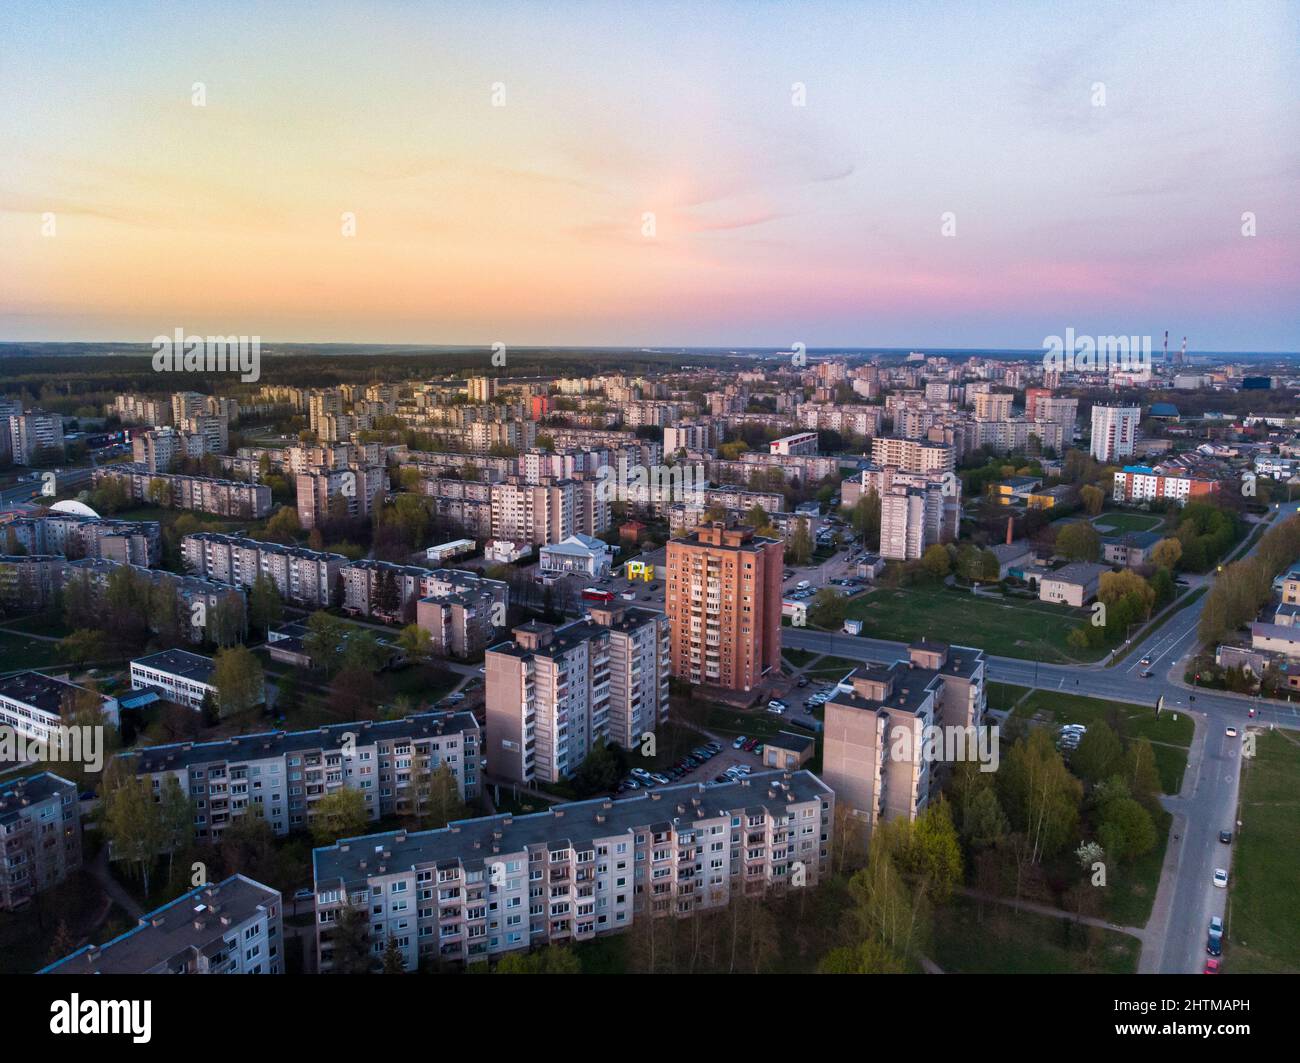 Aerial view of the Houses in Kaunas, Lithuania Stock Photo